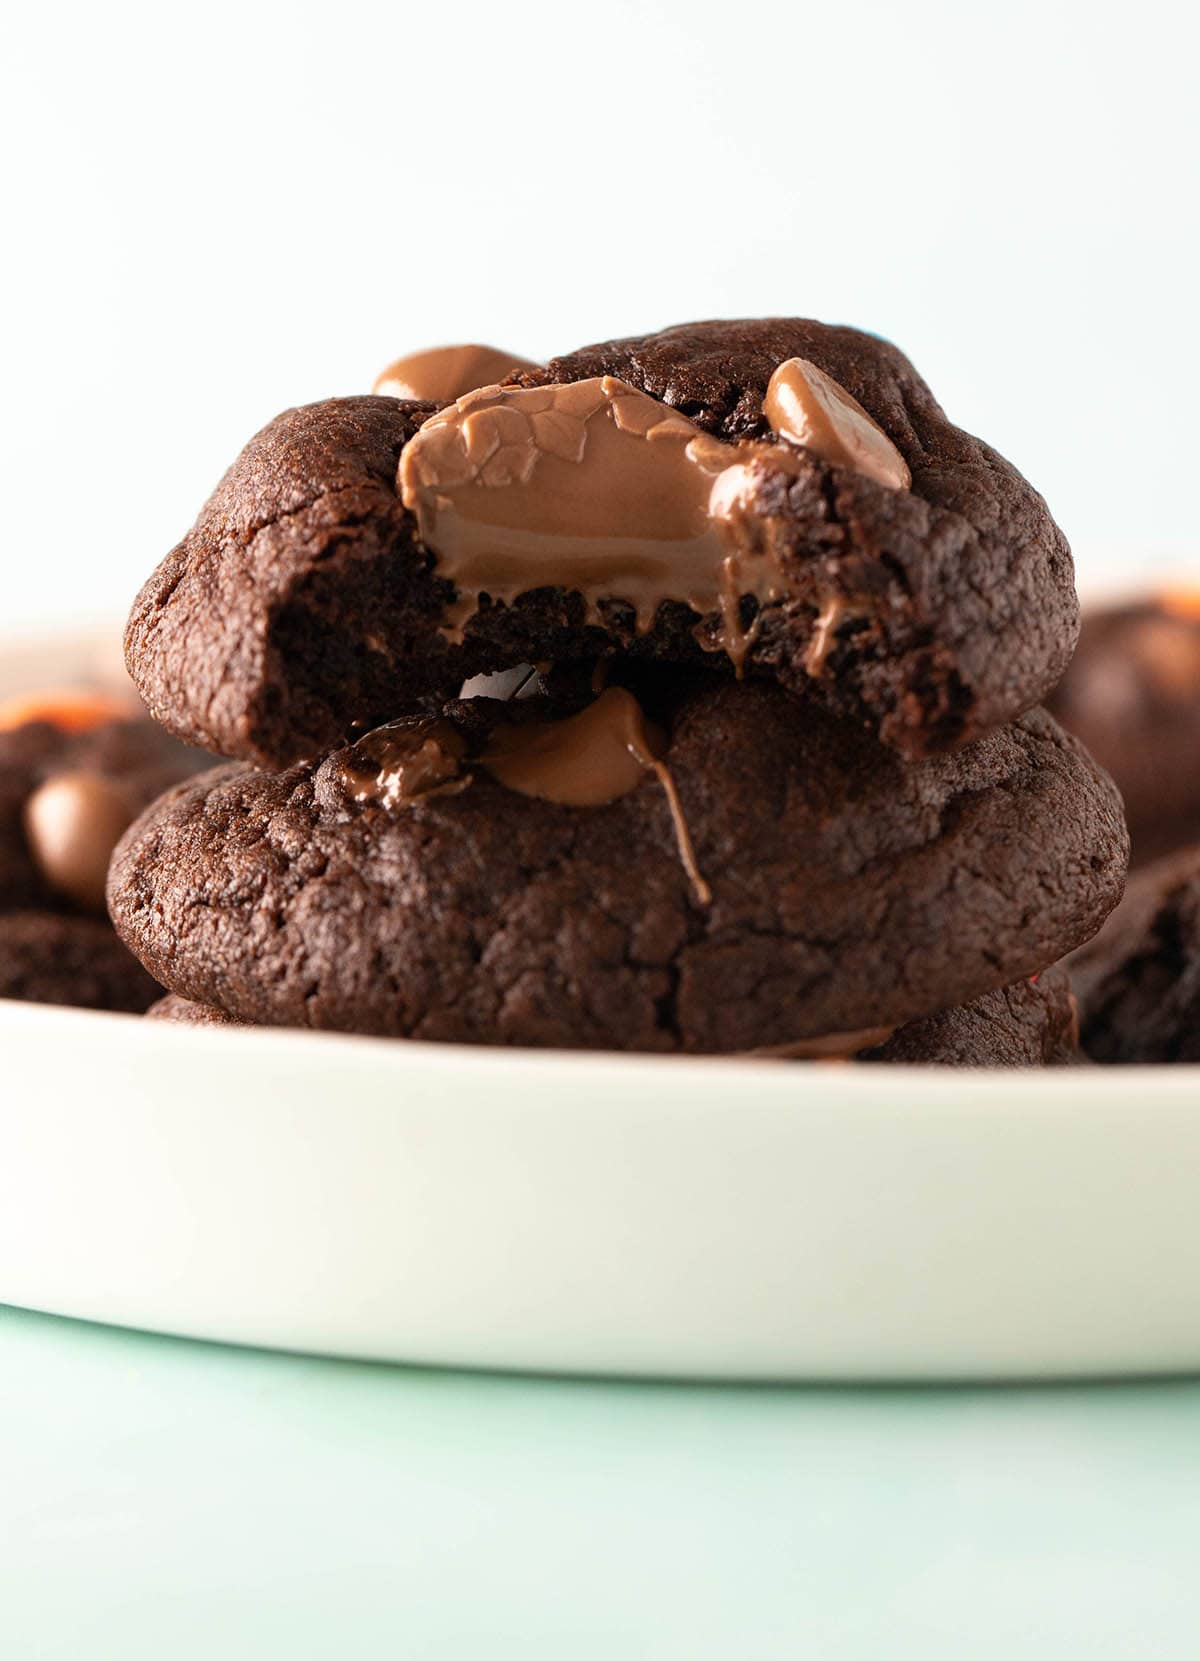 A tall stack of chocolate Easter egg cookies with a bite taken out of it.